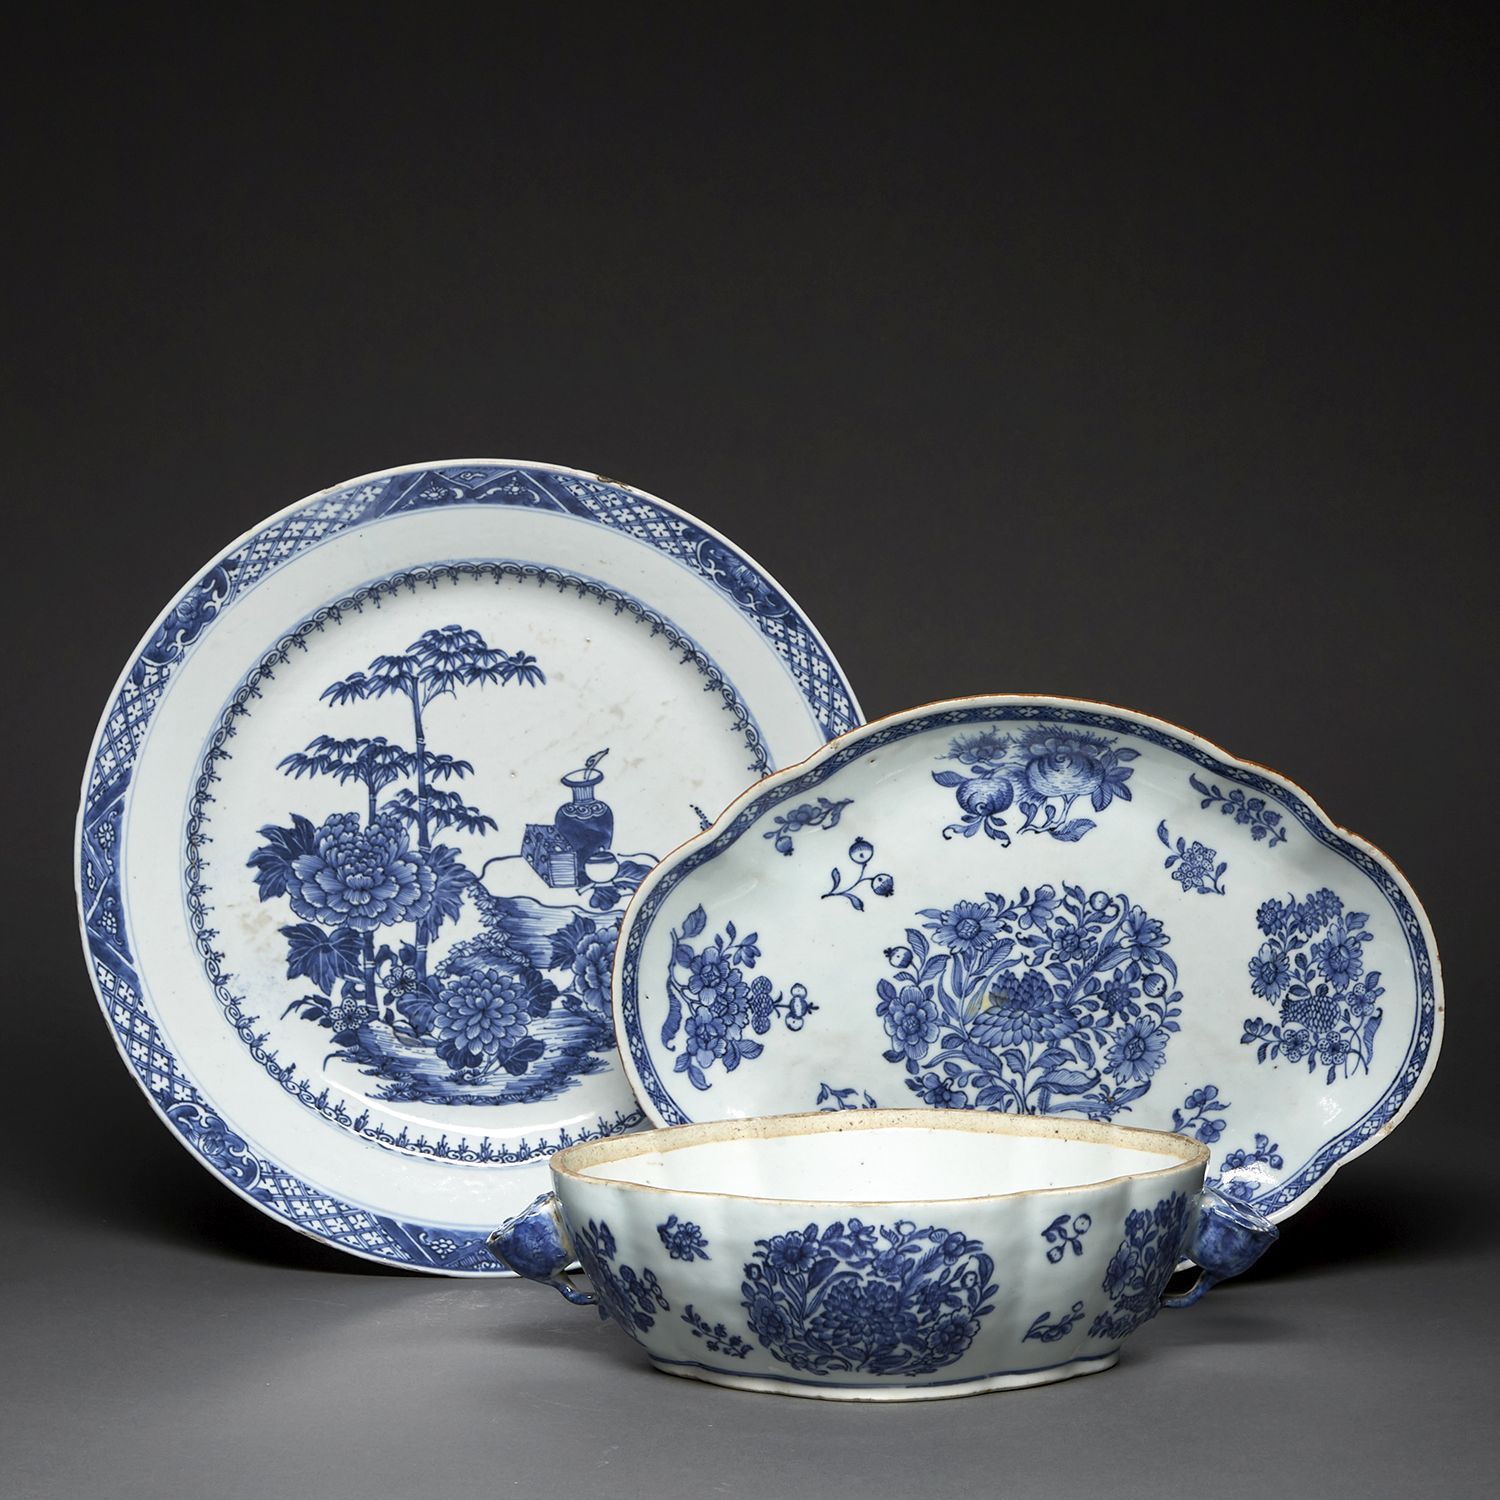 Null SUITE OF THREE PIECES
in porcelain and blue-white enamels, including a terr&hellip;